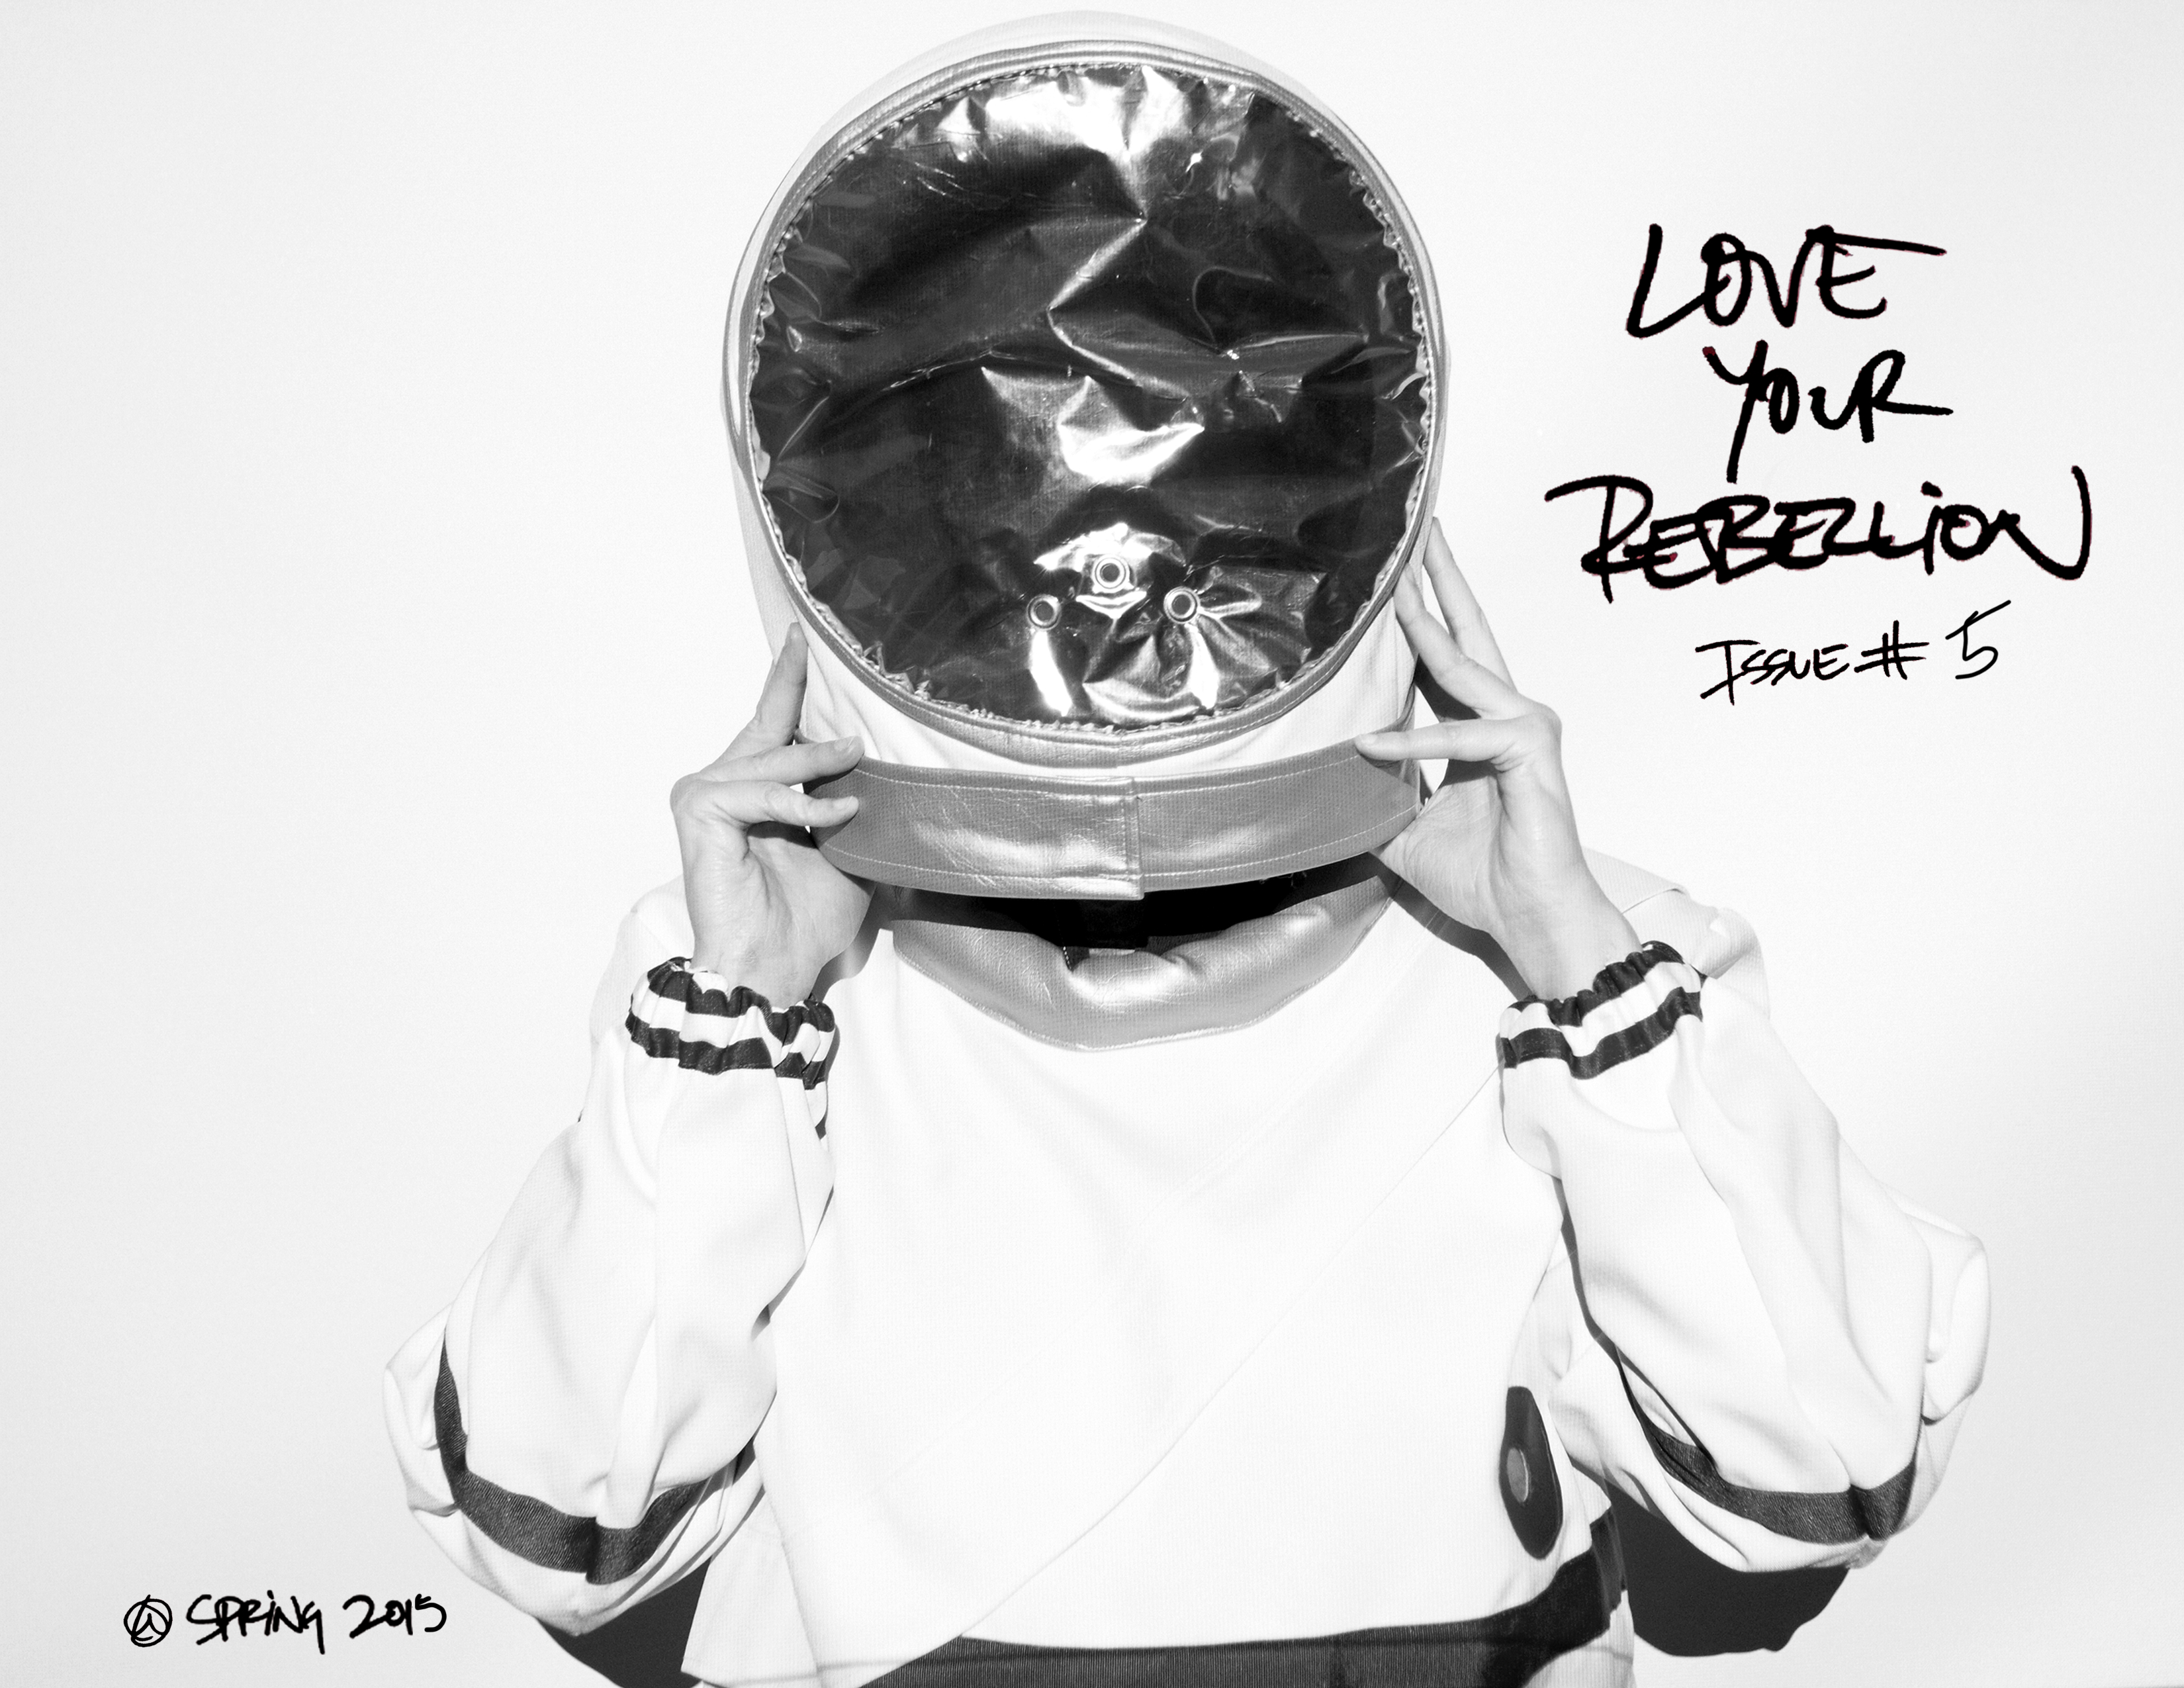 Love Your Rebellion Issue 5 PDF